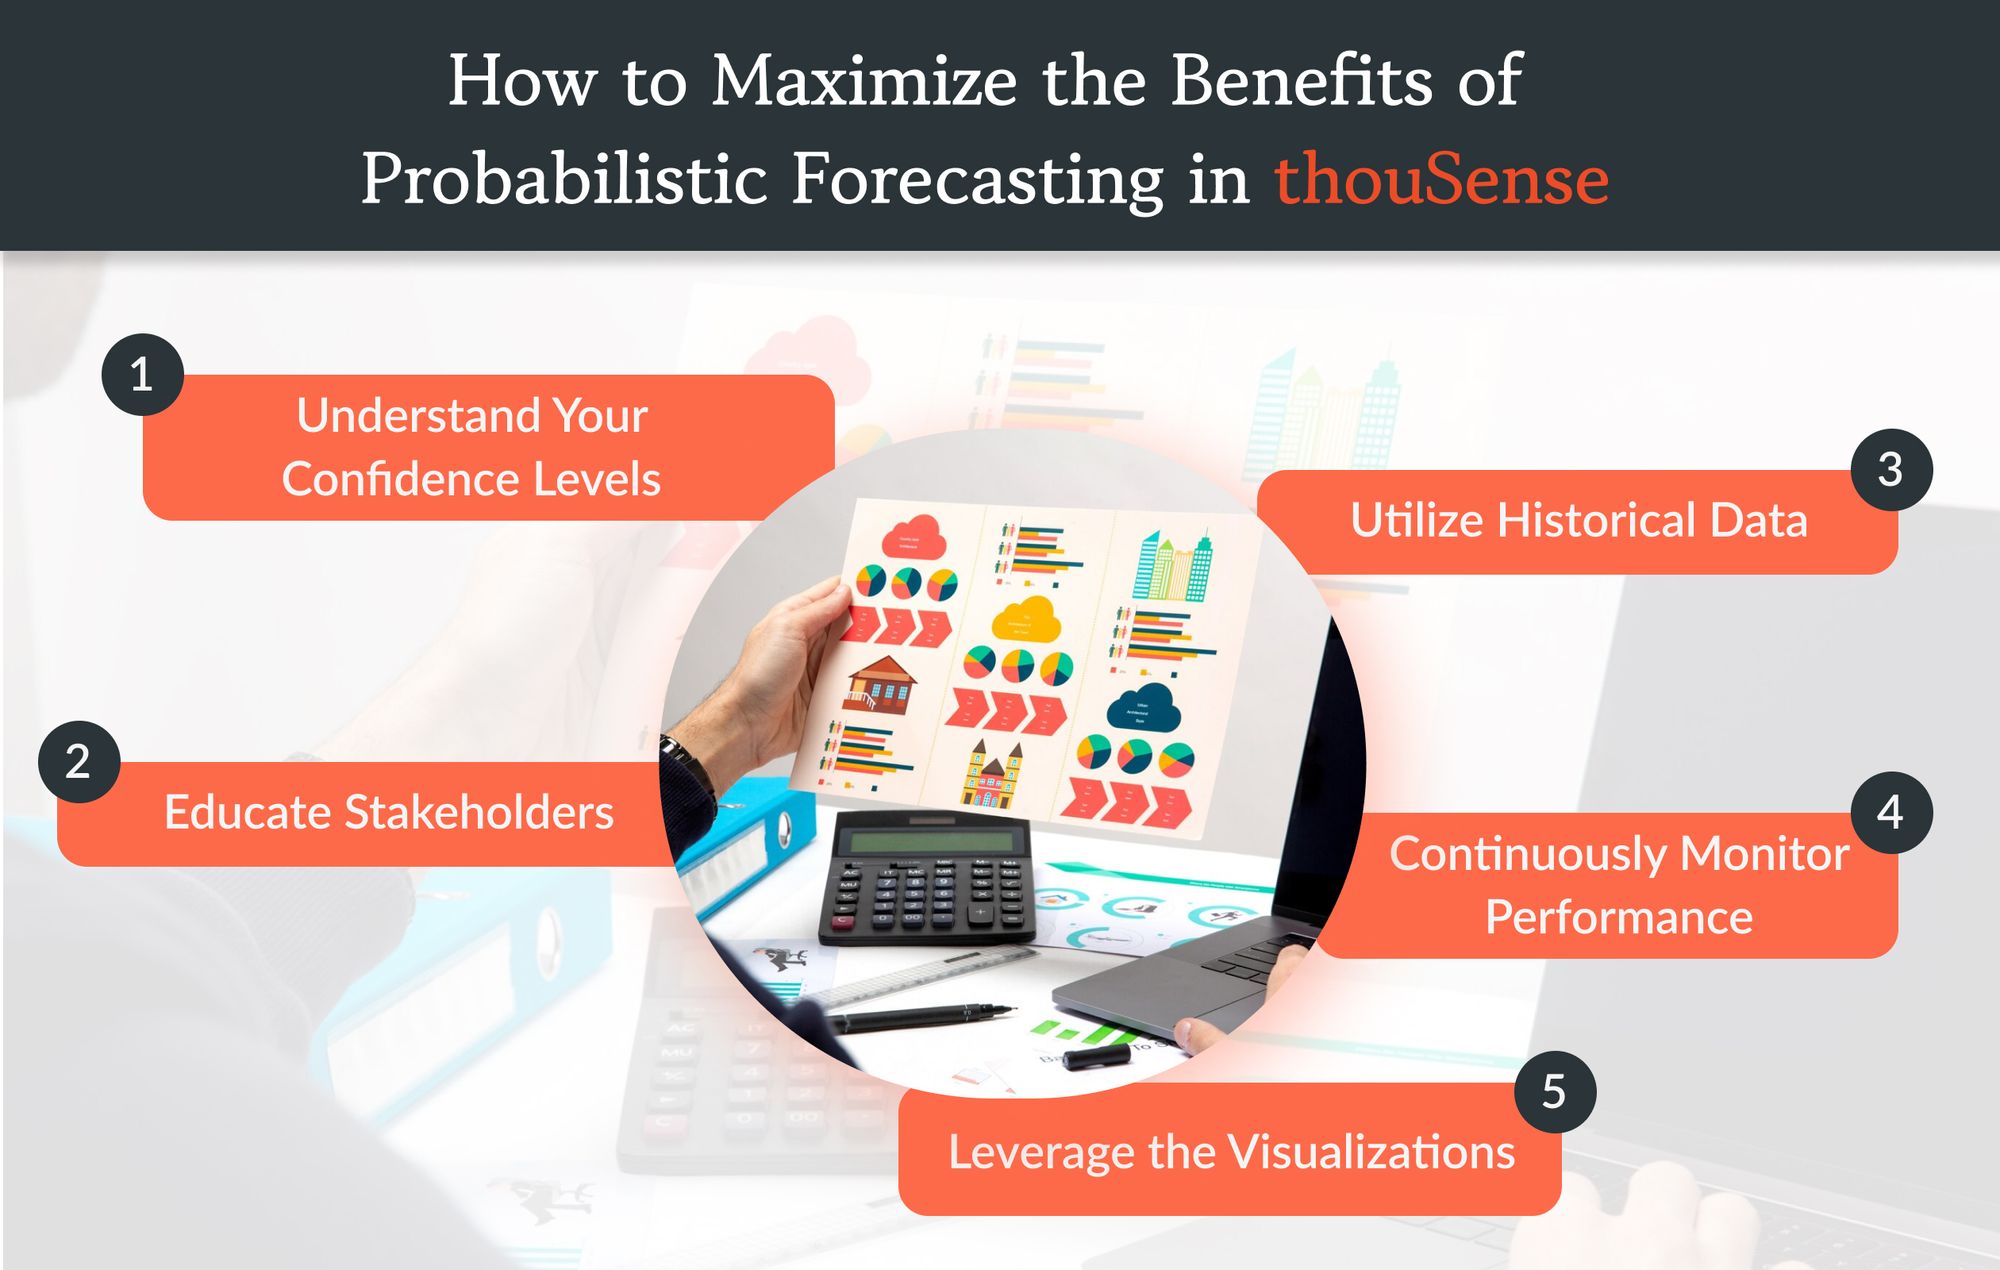 How to Maximize the Benefits of Probabilistic Forecasting in thouSense